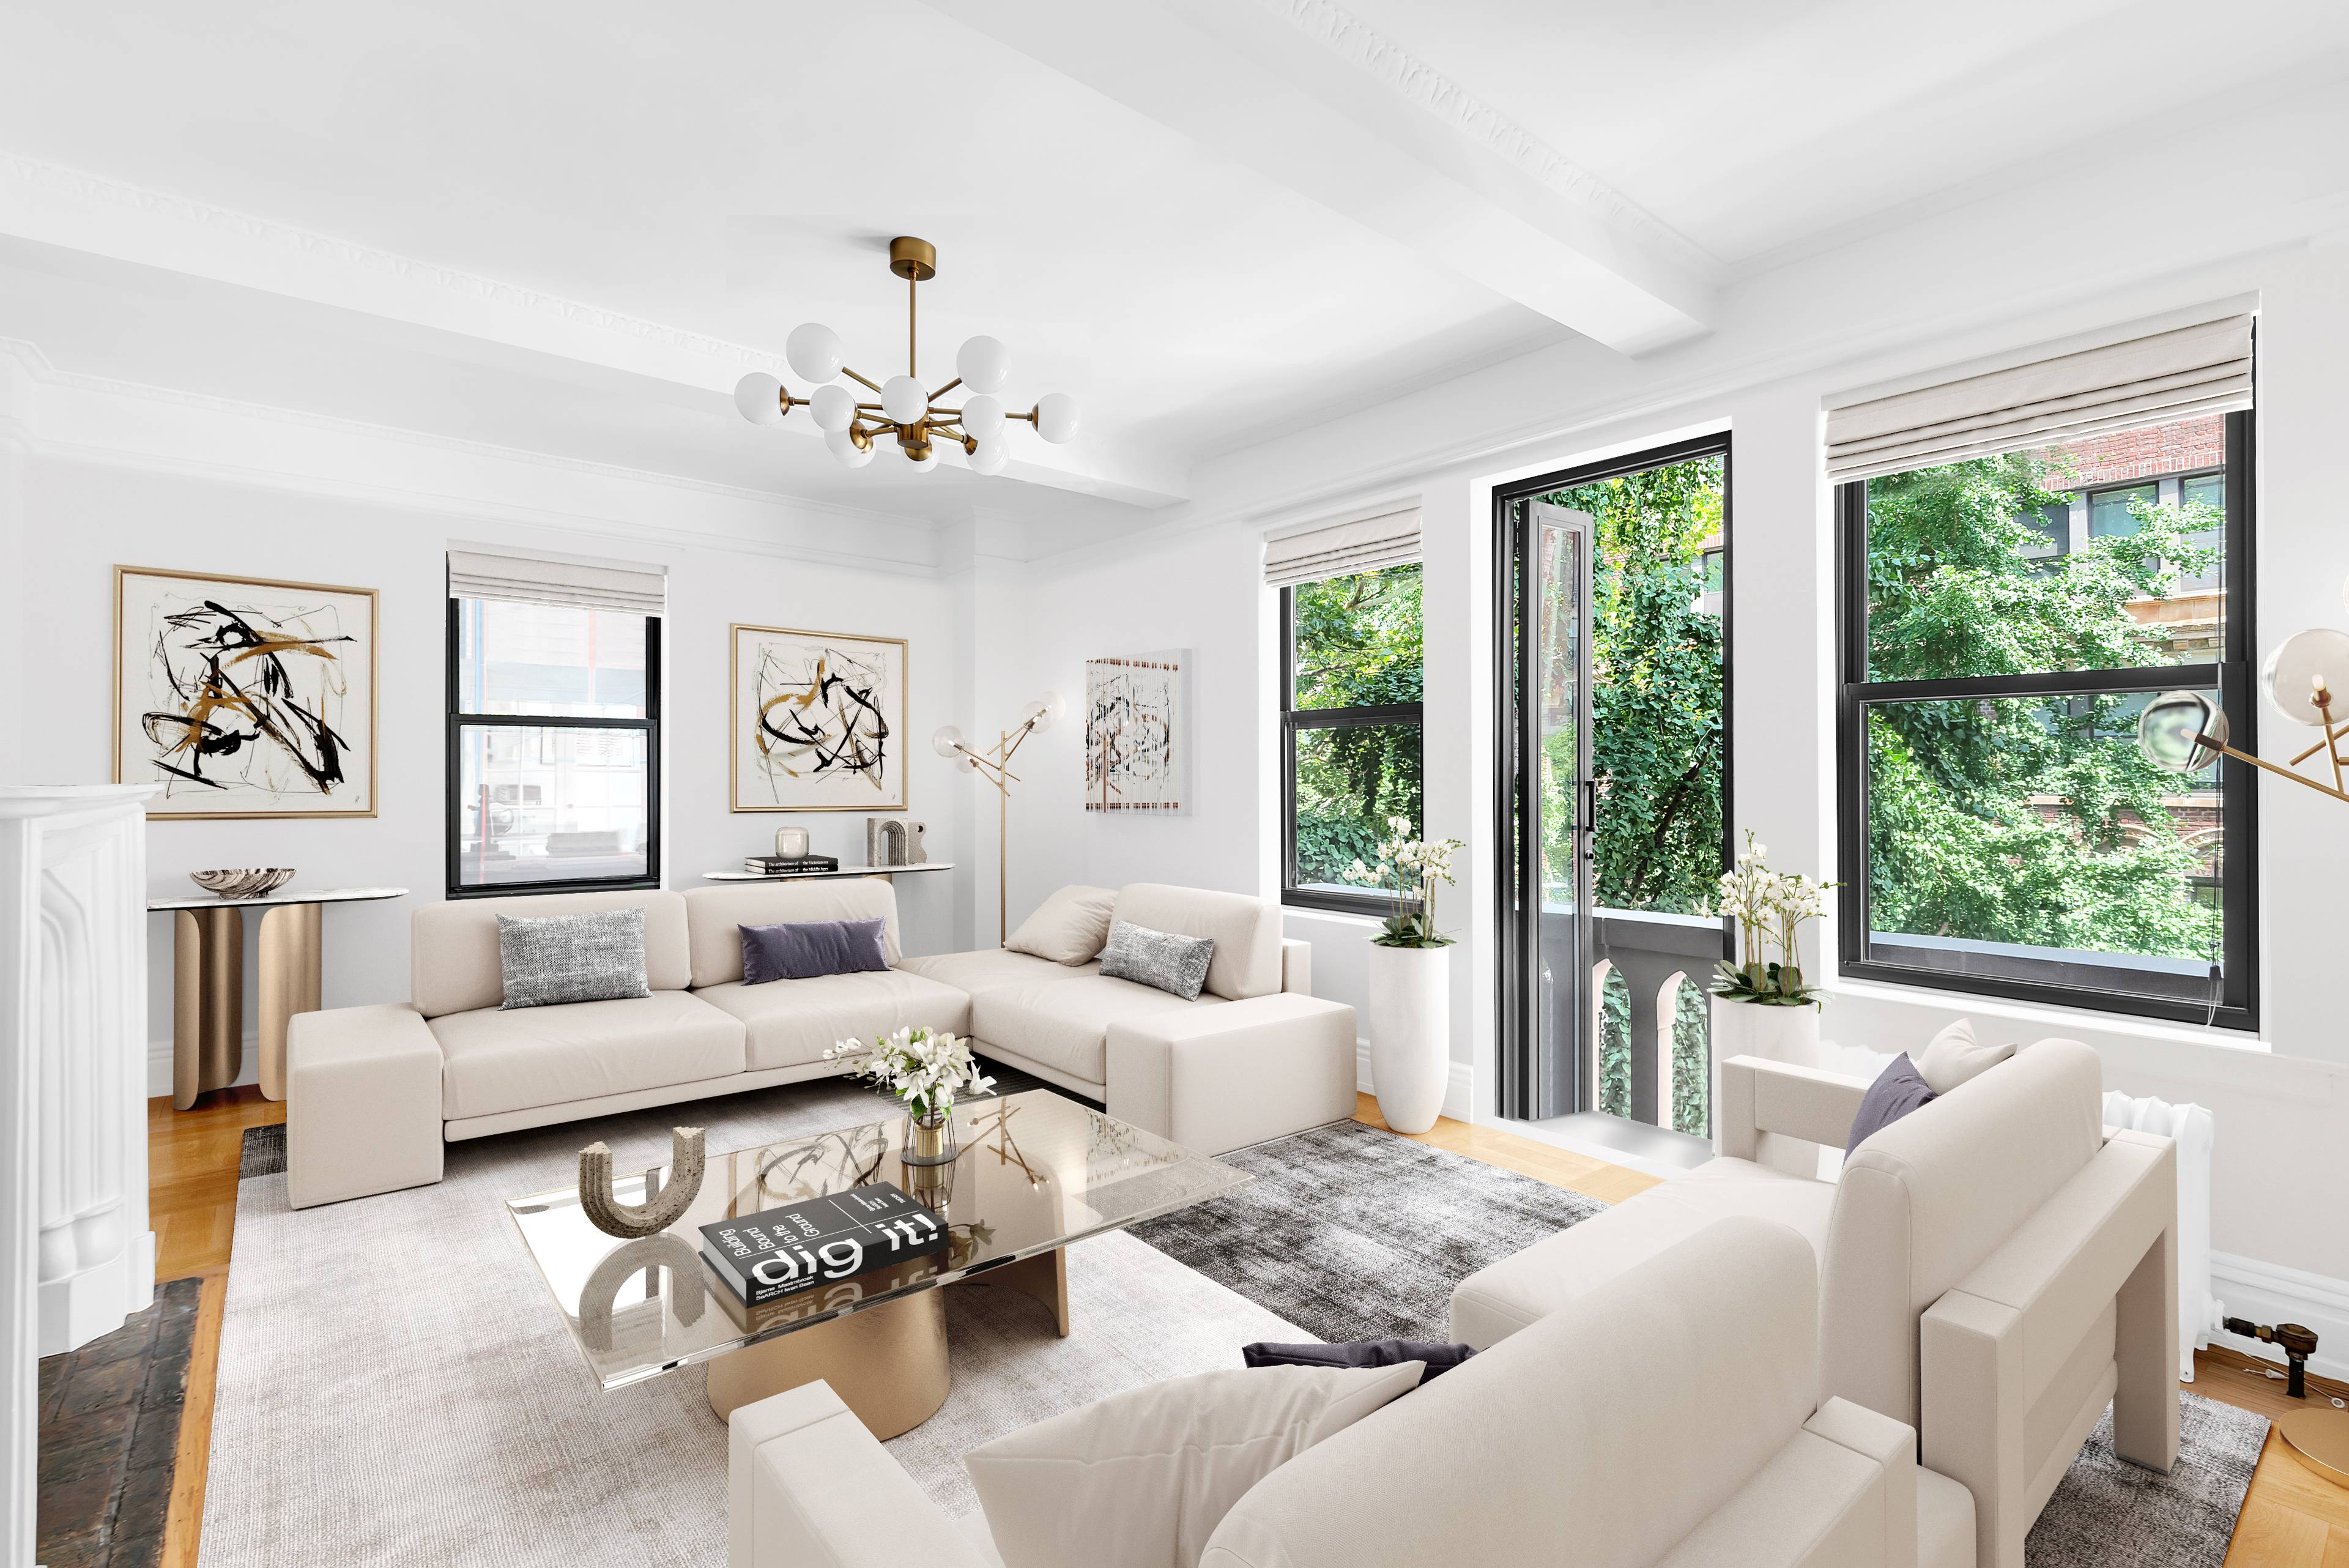 Residence 3G is a stunning prewar 1 bedroom, 1 bathroom home just off the prime Gold Coast enclave of Greenwich Village.